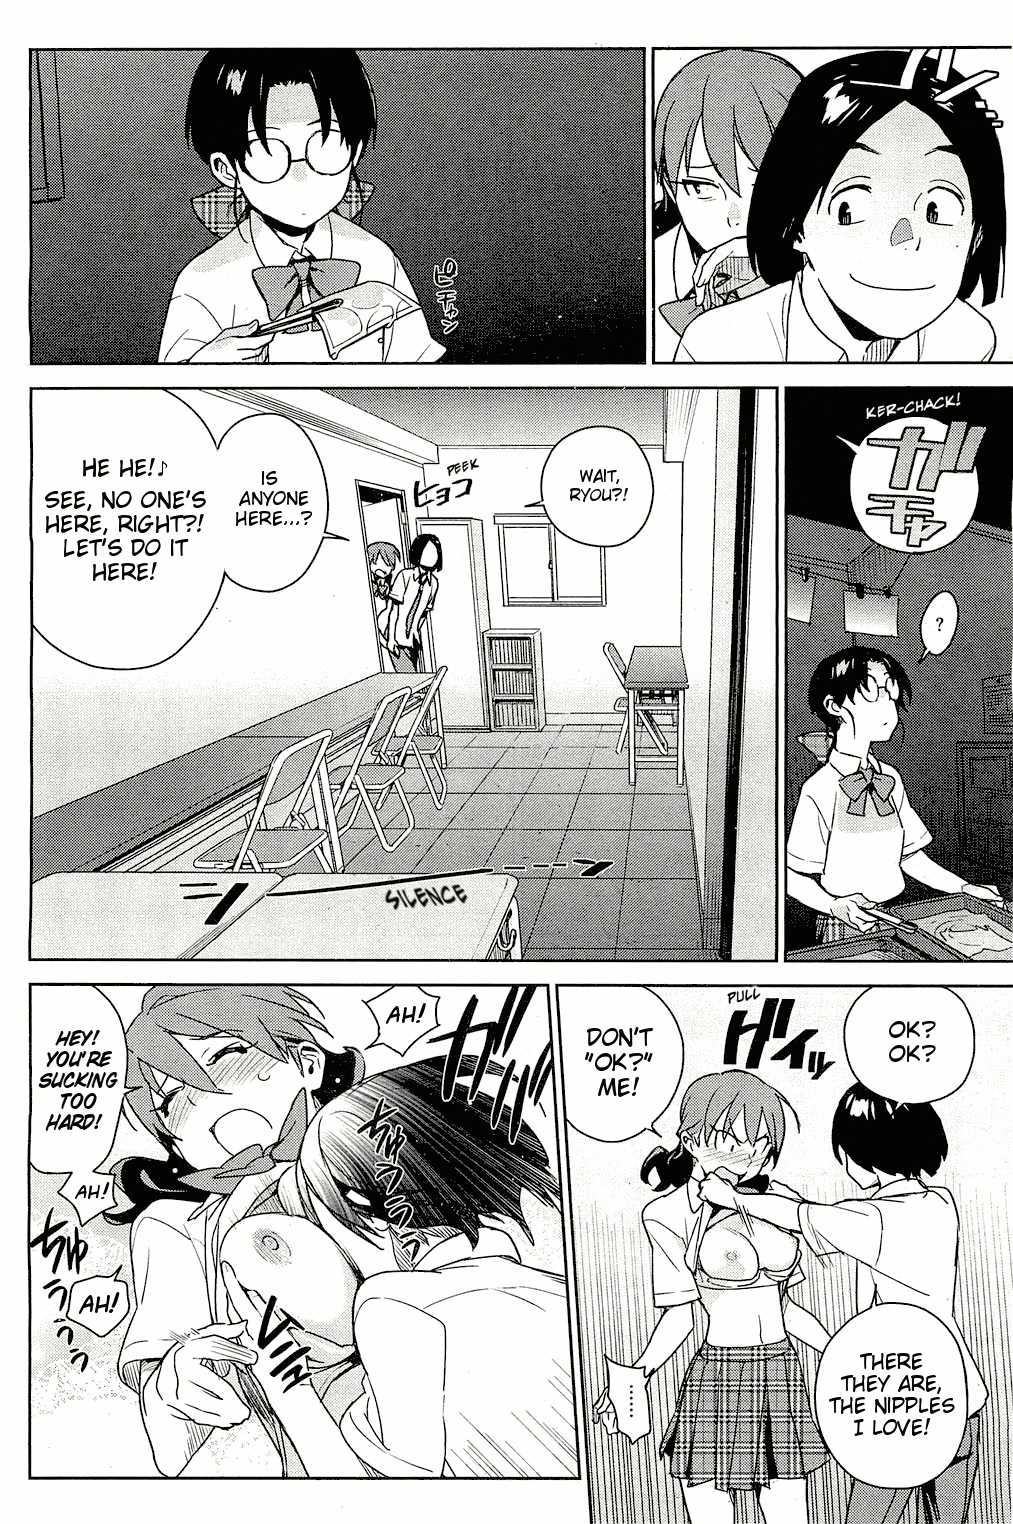 [Yukimi] Stay Seeds Ch. 1-2 [English] [Anonymous, TV+MumeiTL] [ゆきみ] STAY SEEDS 第1-2話 [英訳]